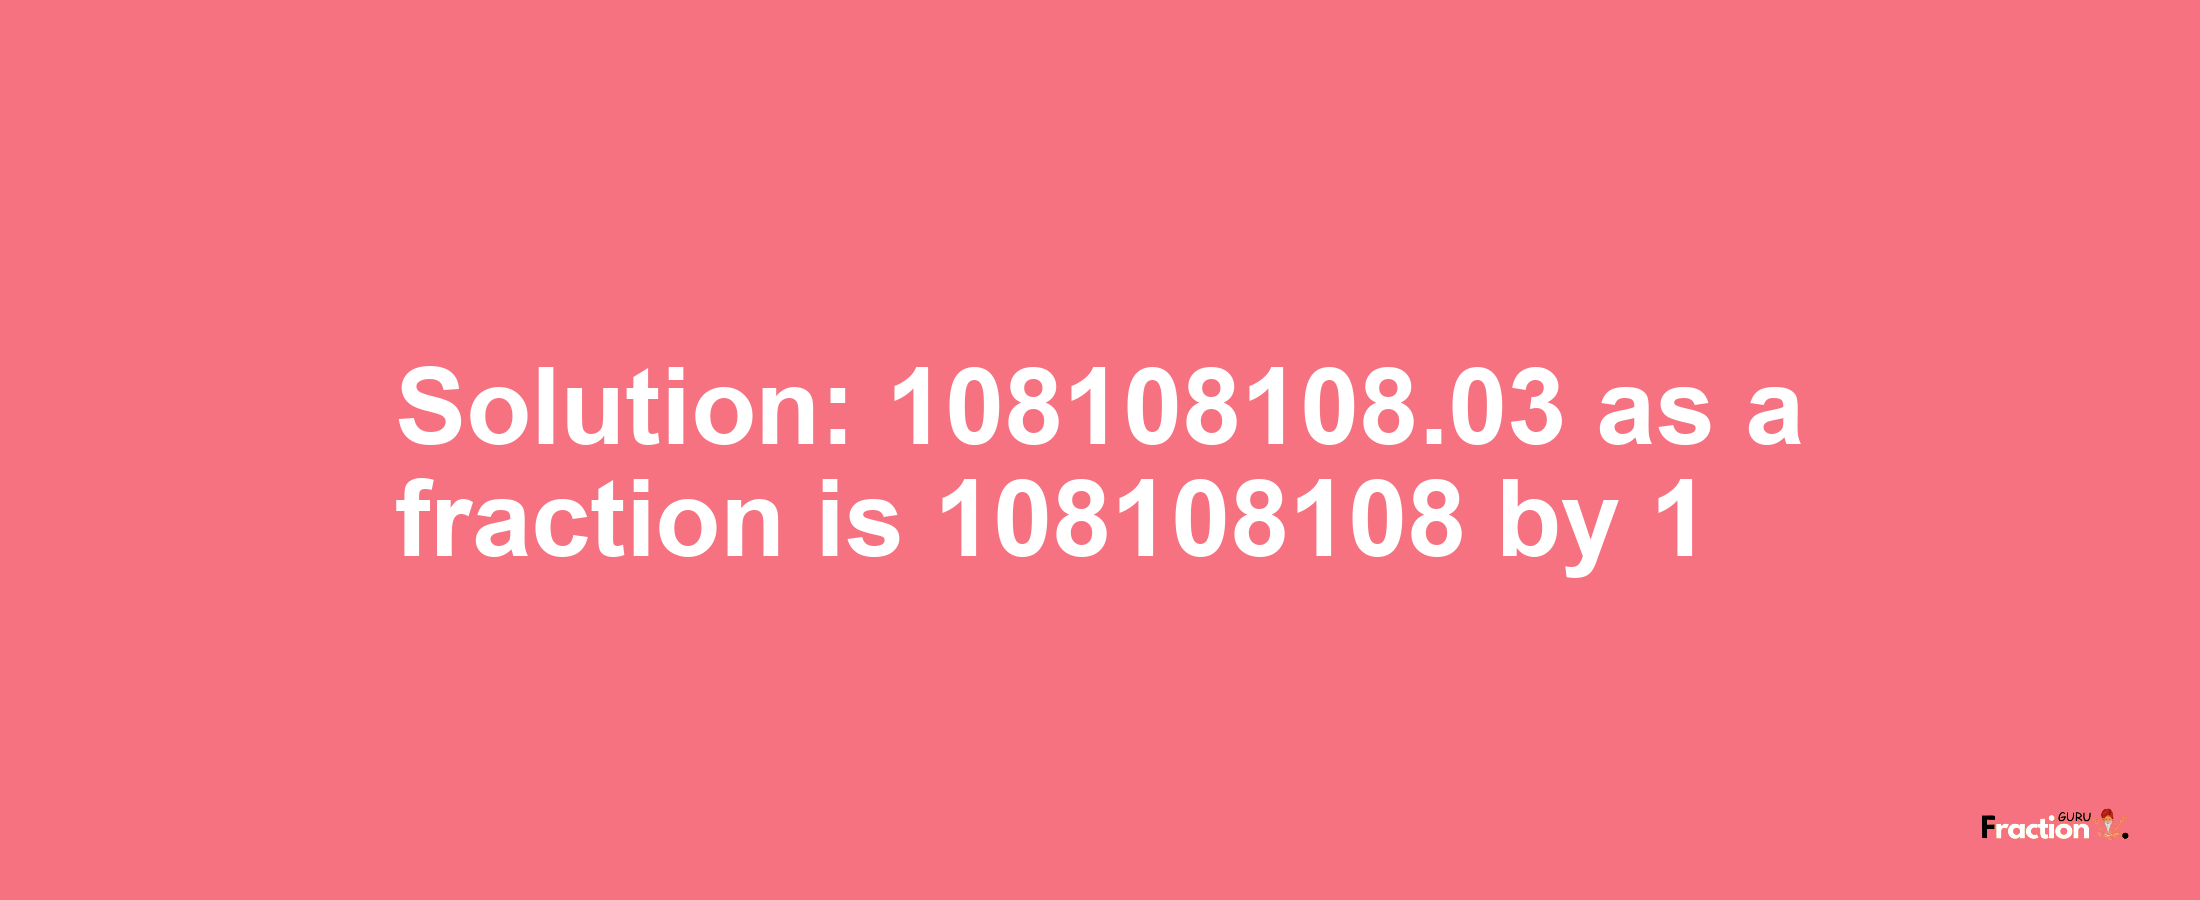 Solution:108108108.03 as a fraction is 108108108/1